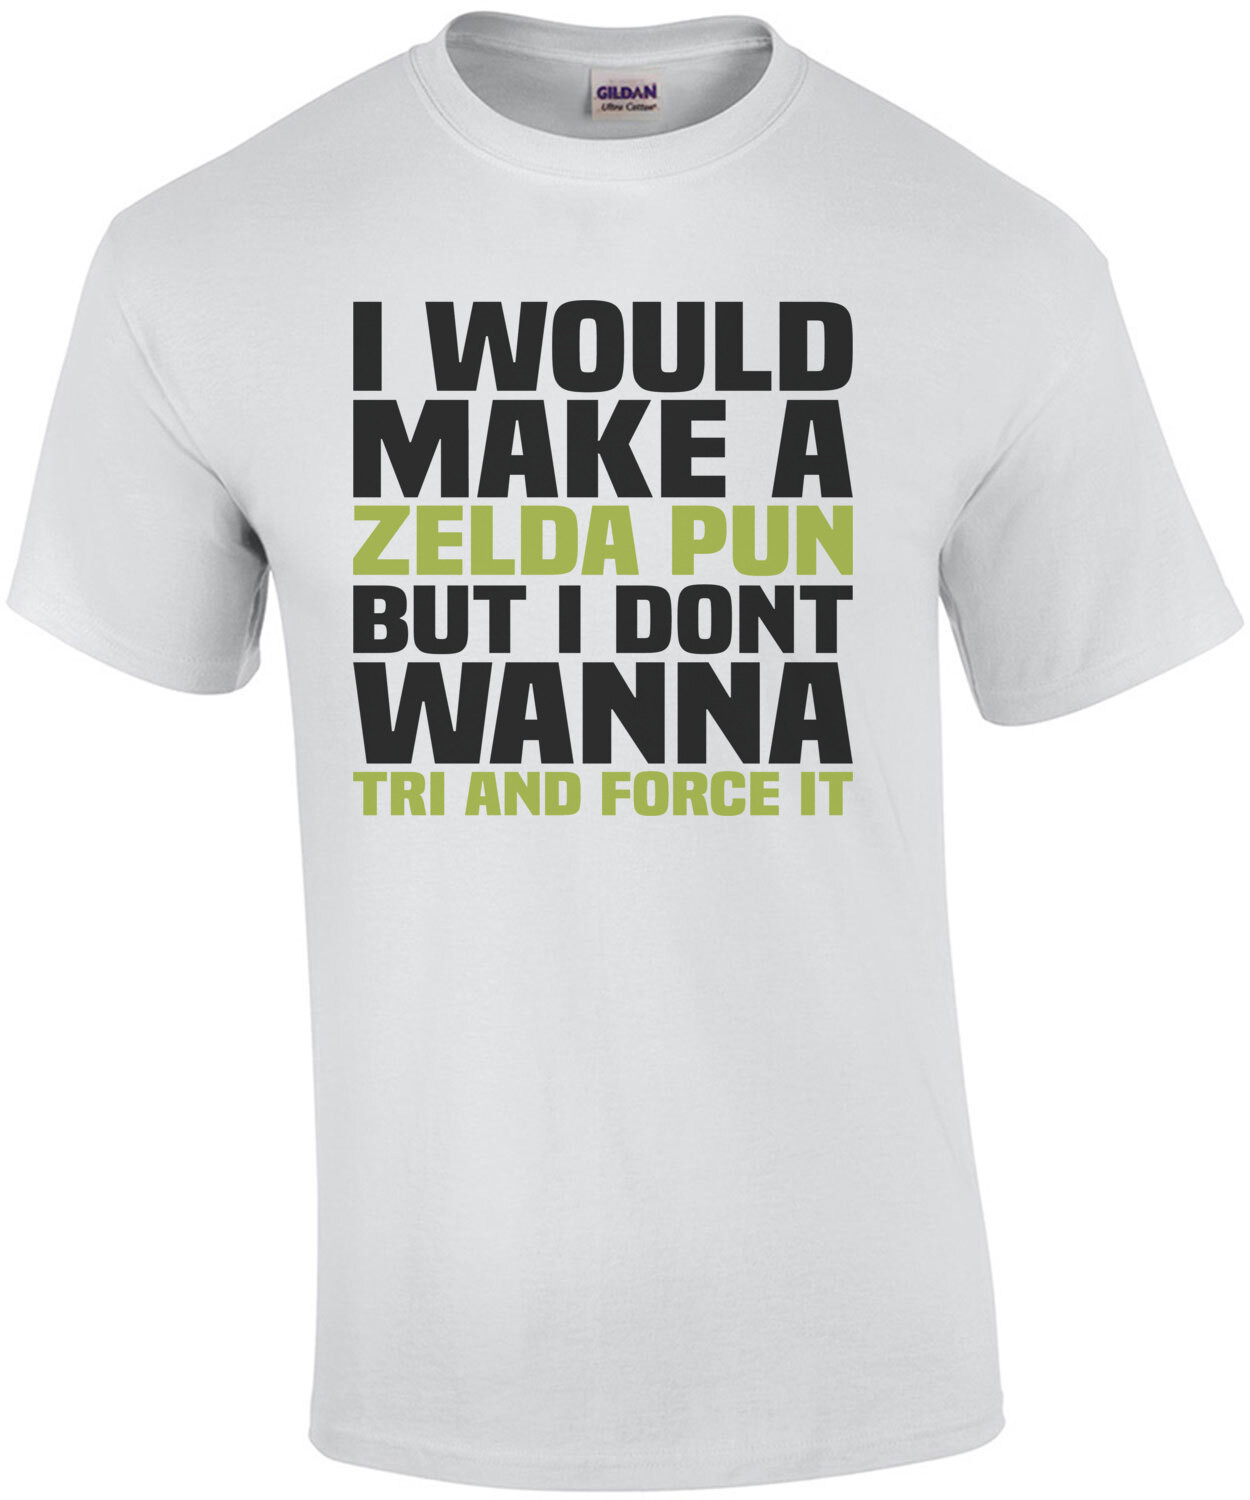 I would make a Zelda pun but I don't wanna TRI and force it - funny pun video game t-shirt